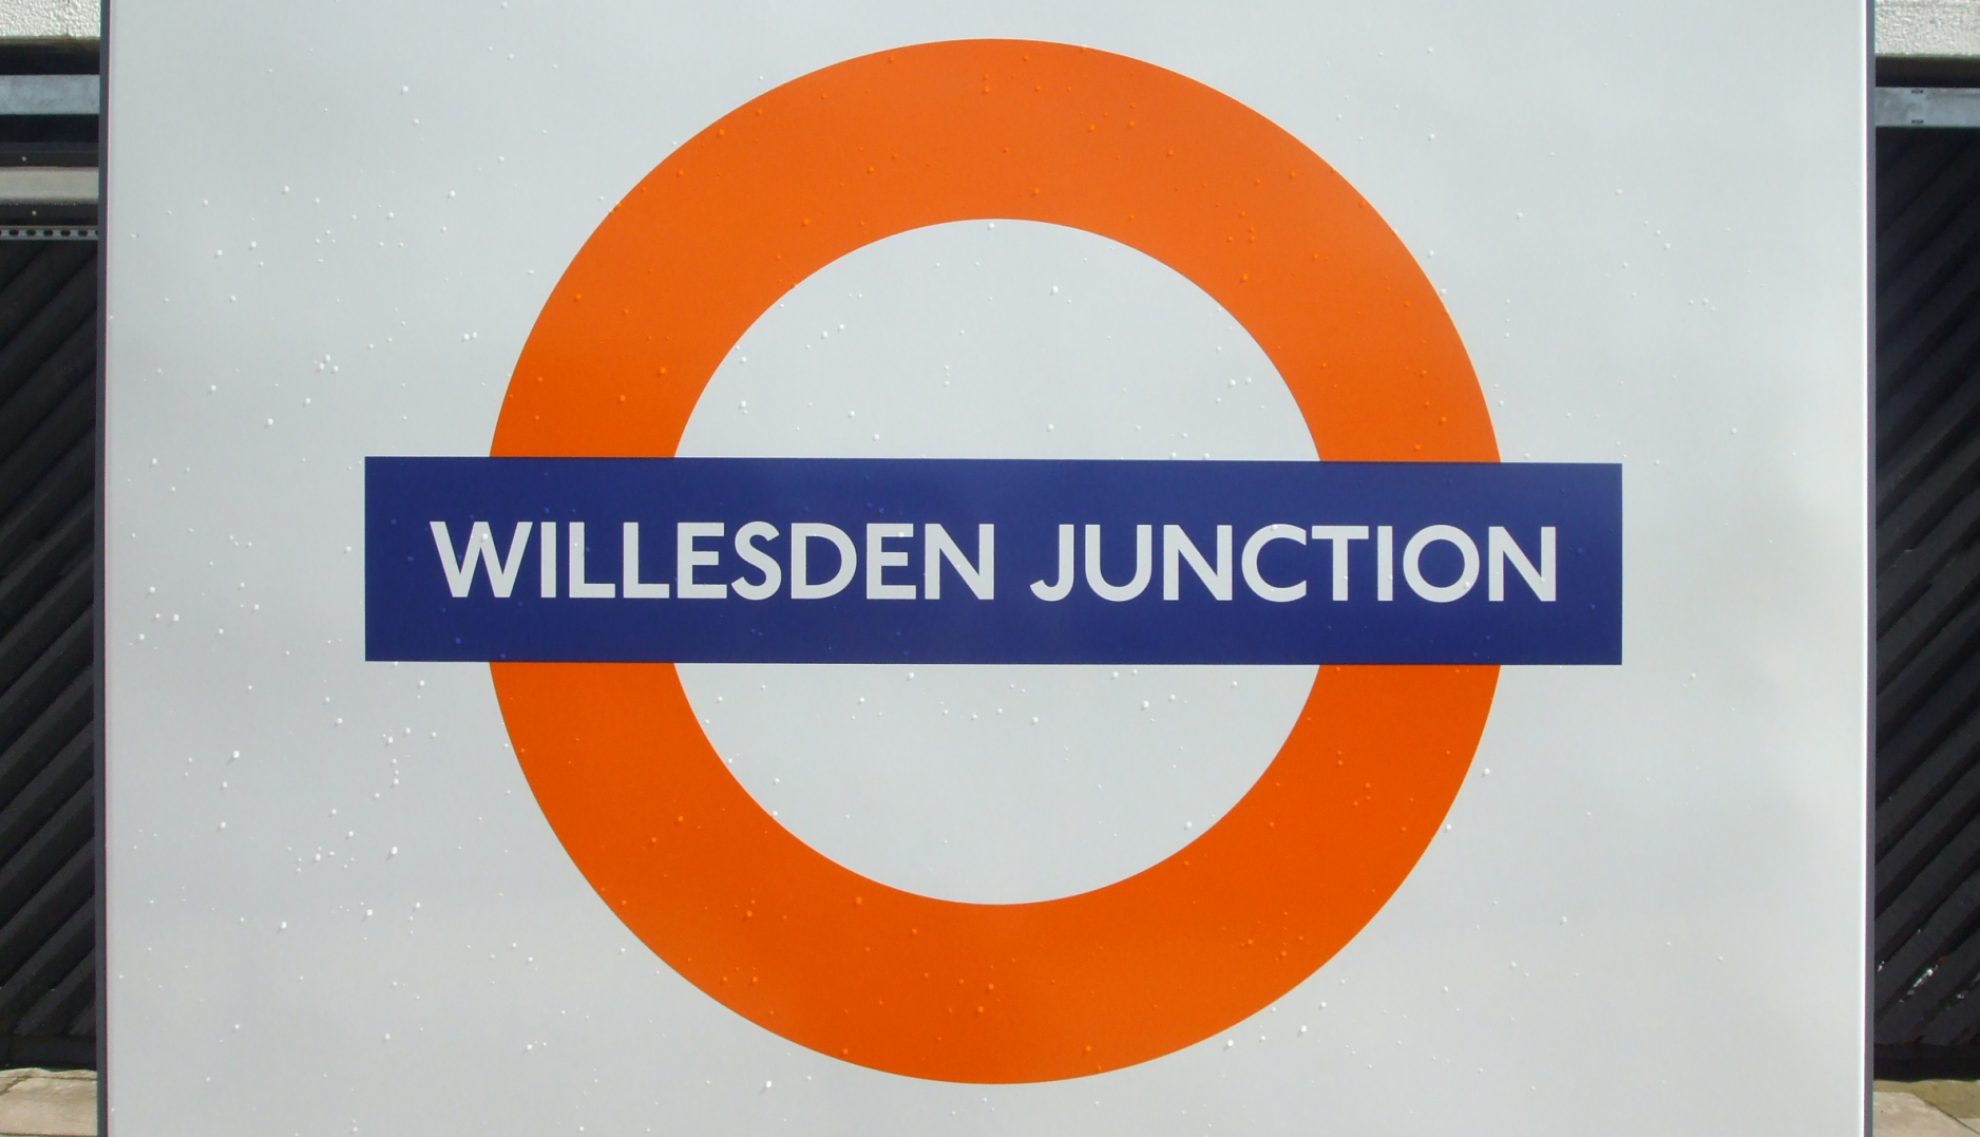 Willesden Junction station sign in the NW10 London postcode